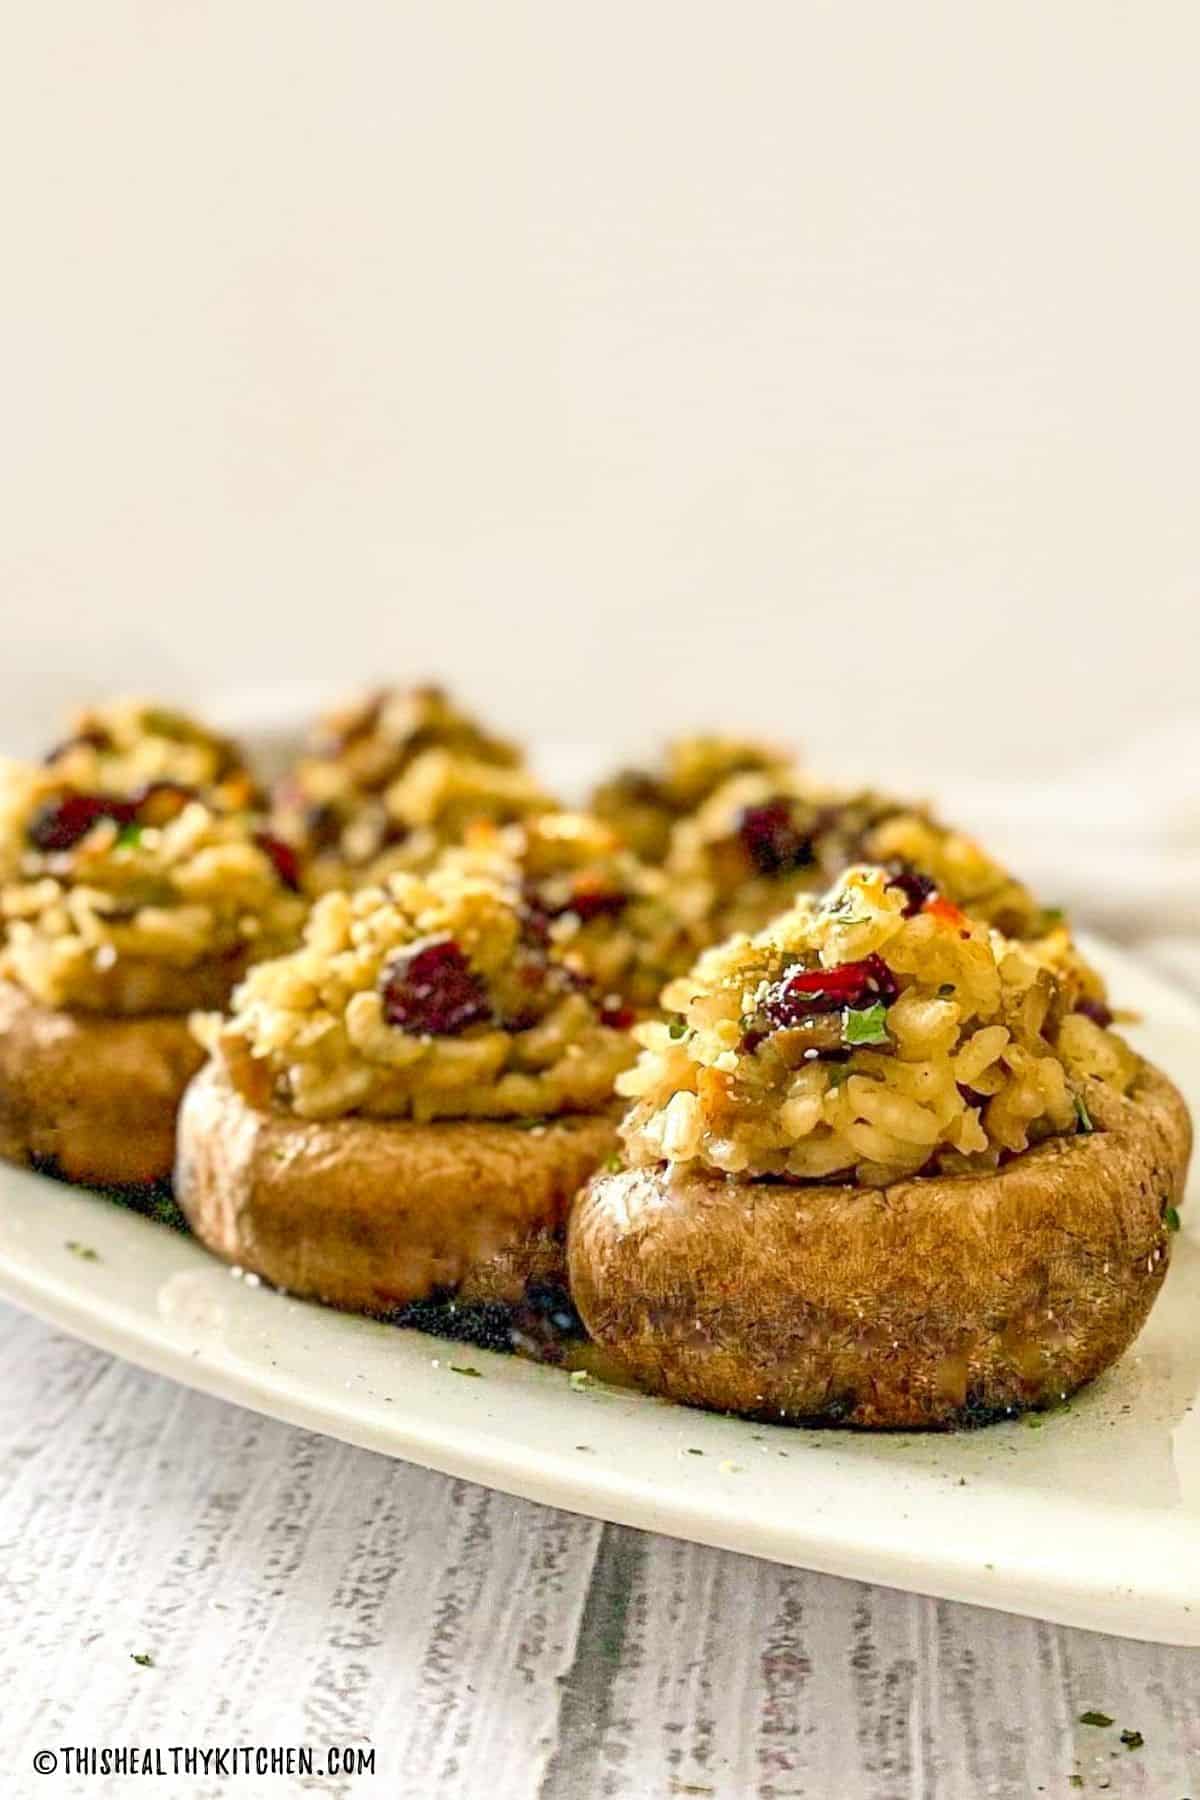 Cranberry risotto stuffed into mushrooms on white tray.